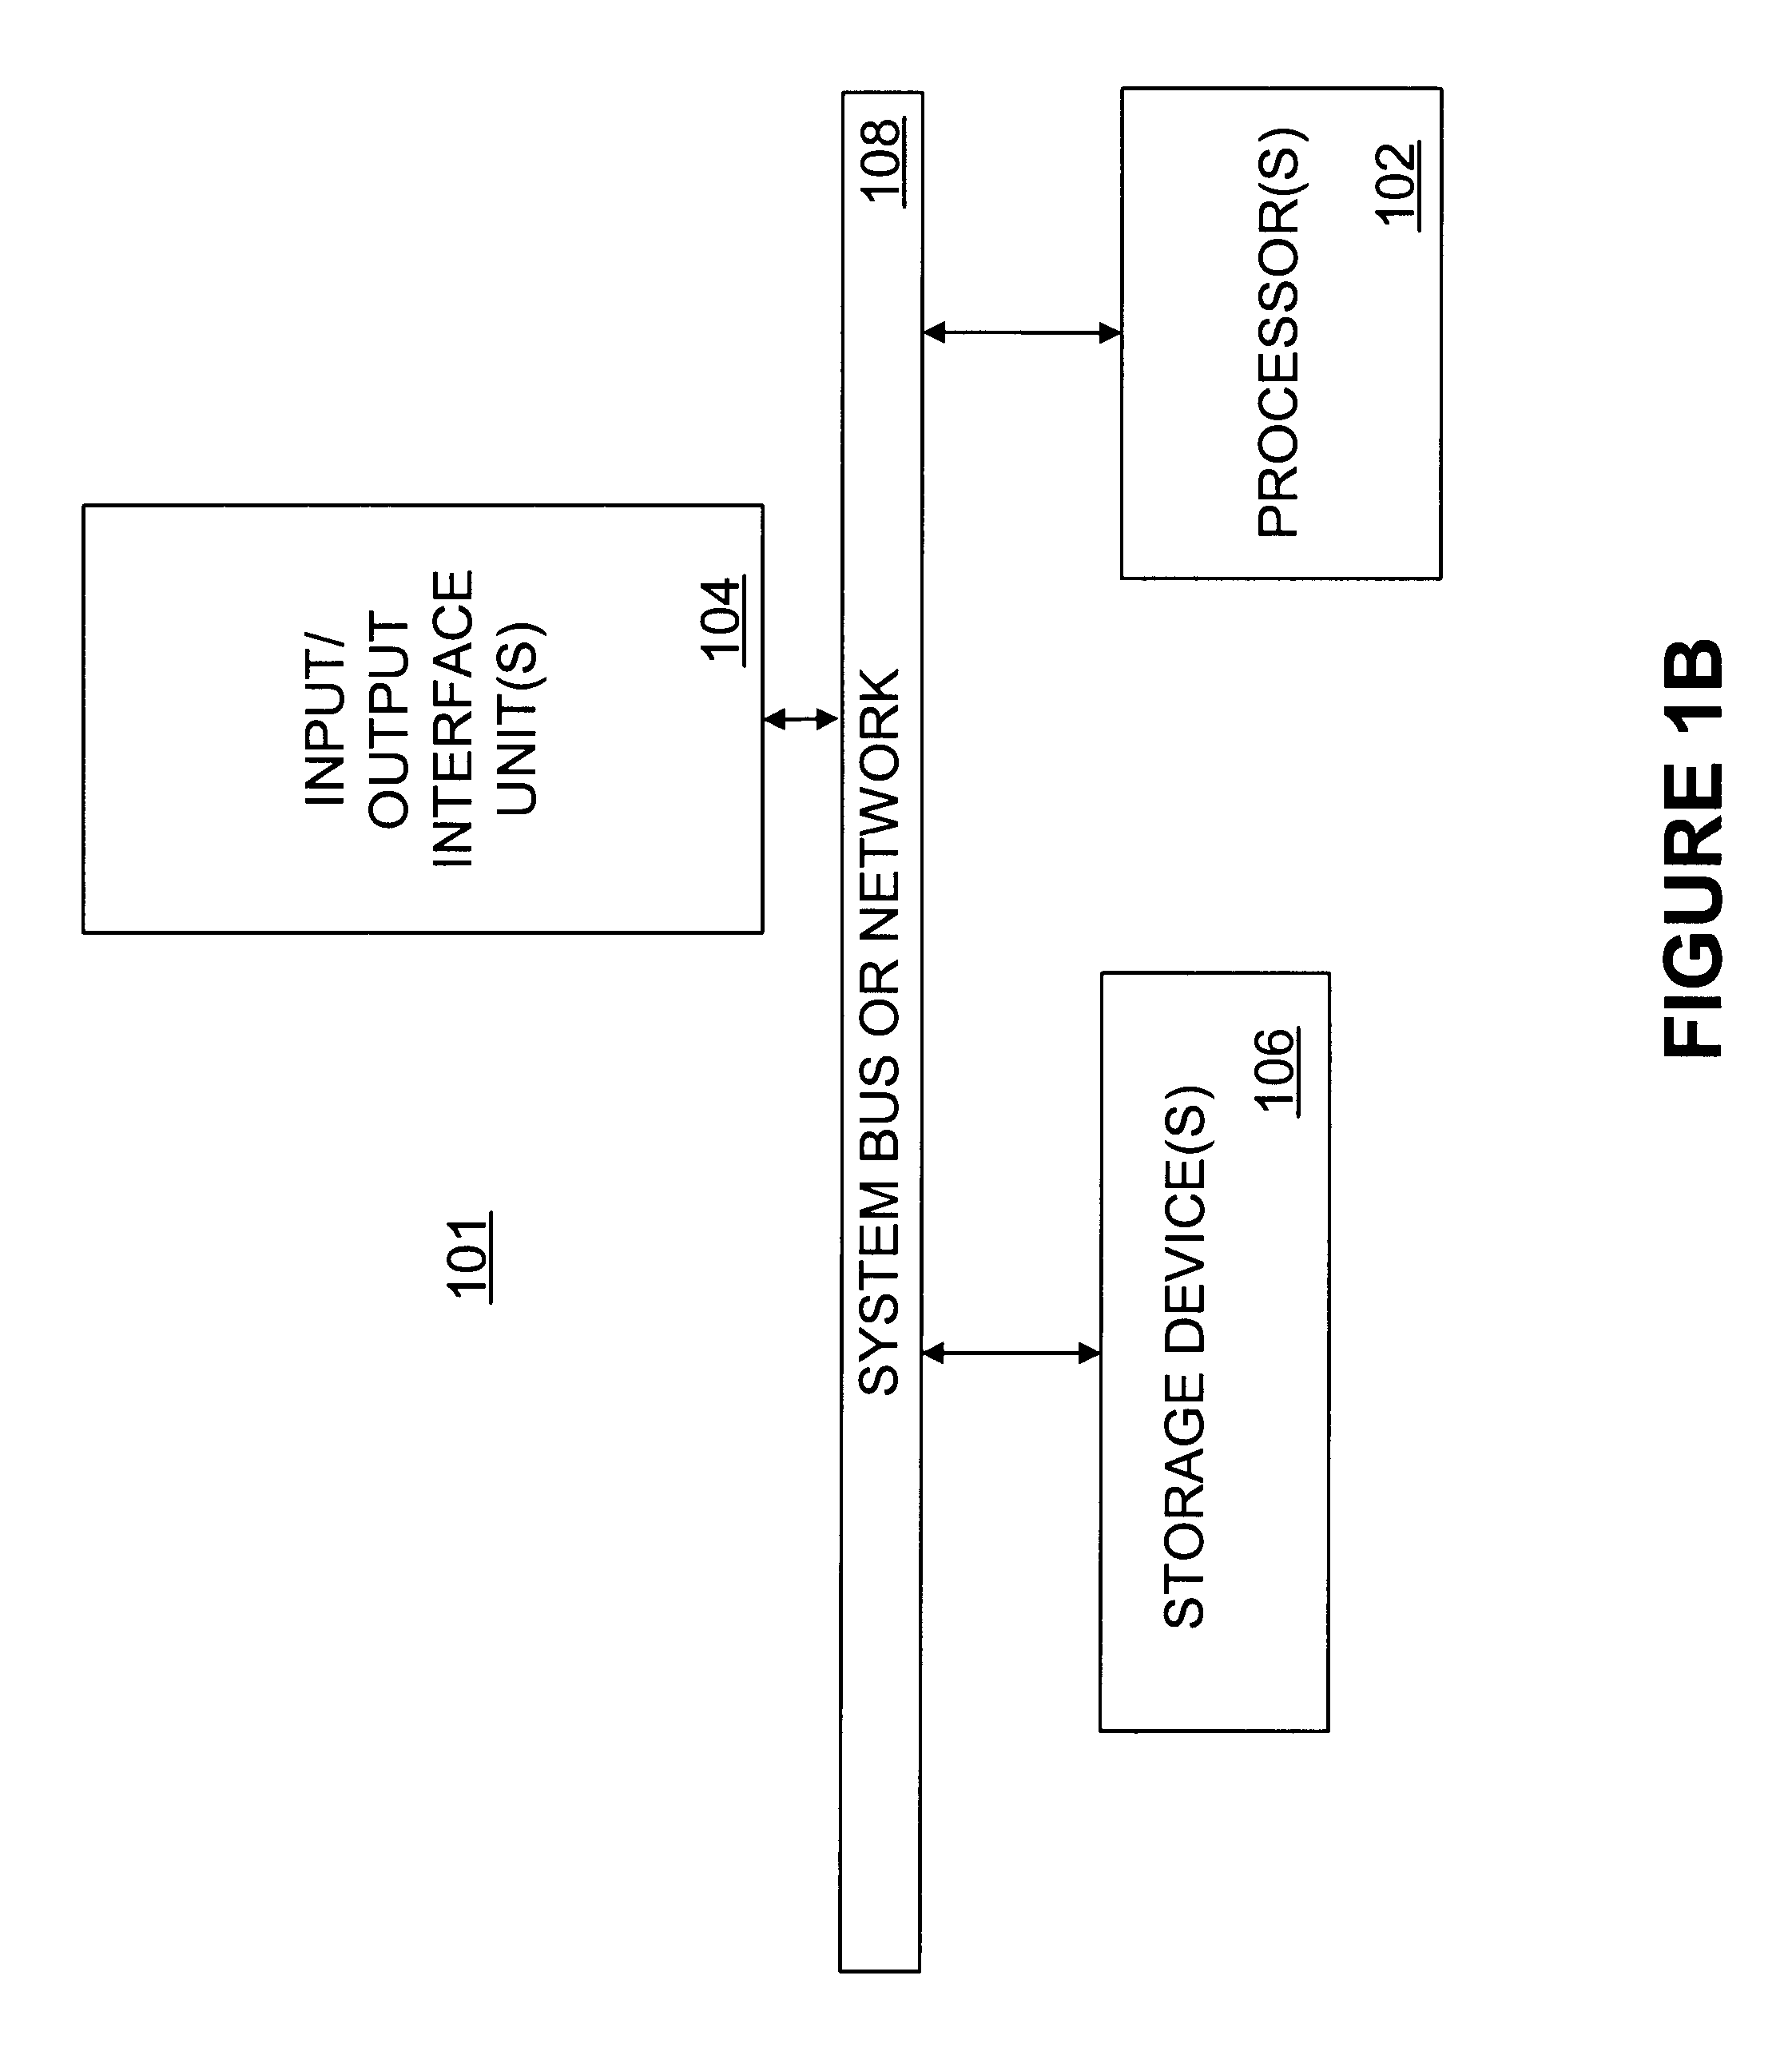 Methods and apparatus for finding semantic information, such as usage logs, similar to a query using a pattern lattice data space